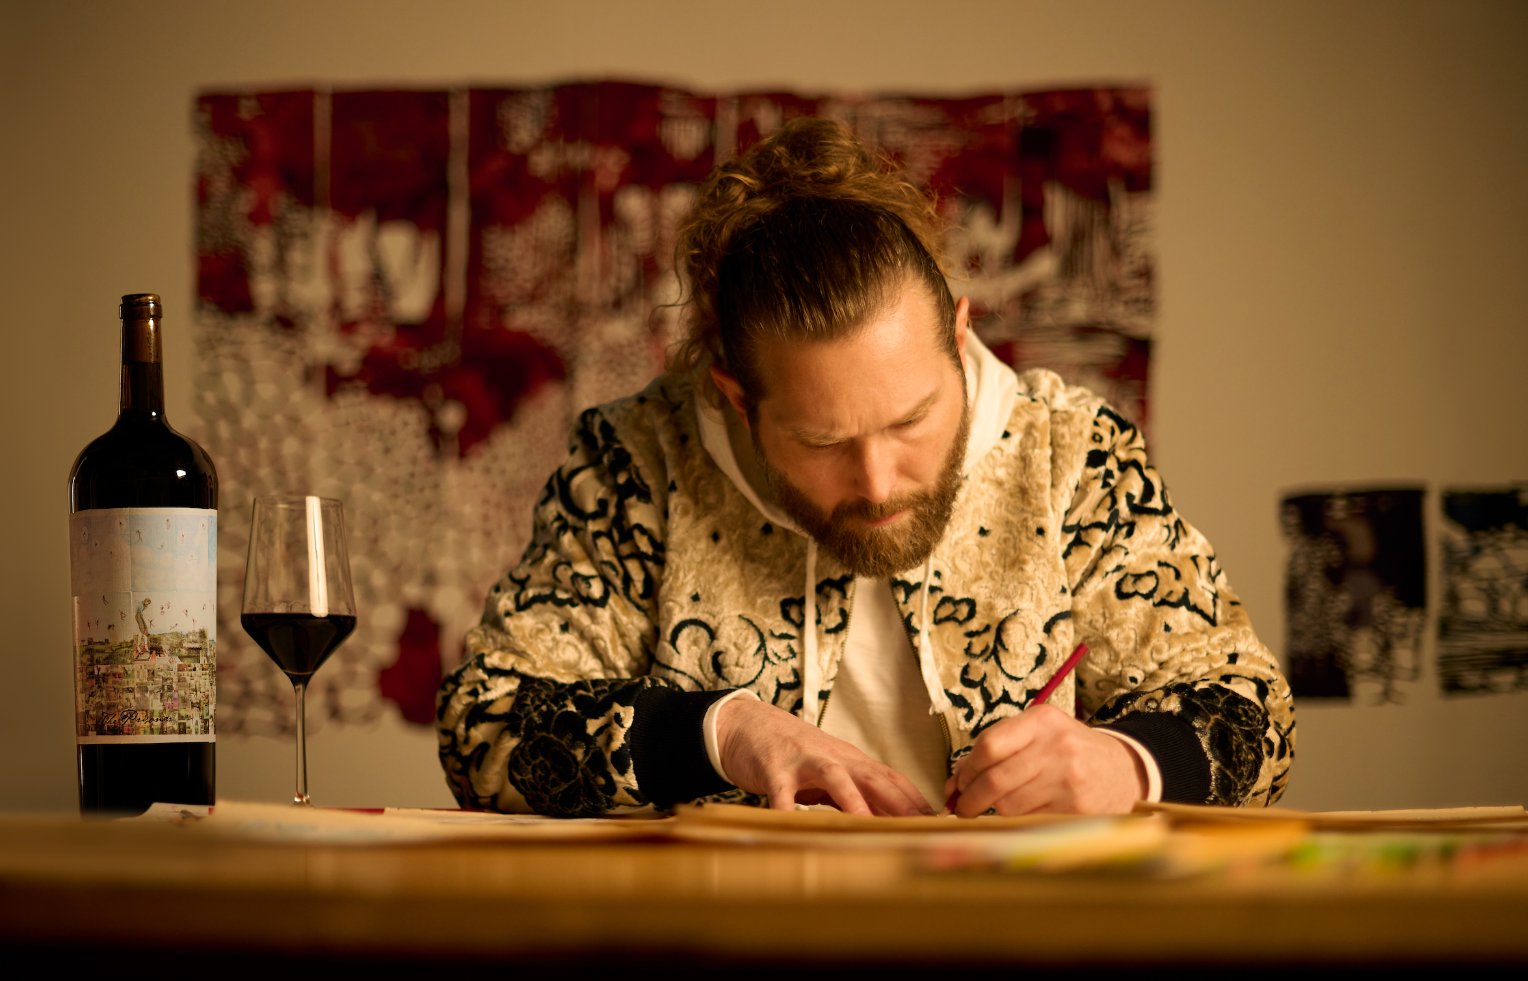 The Prisoner Collaborates With Artist Jesse Krimes for Latest ‘Corrections’ Wine